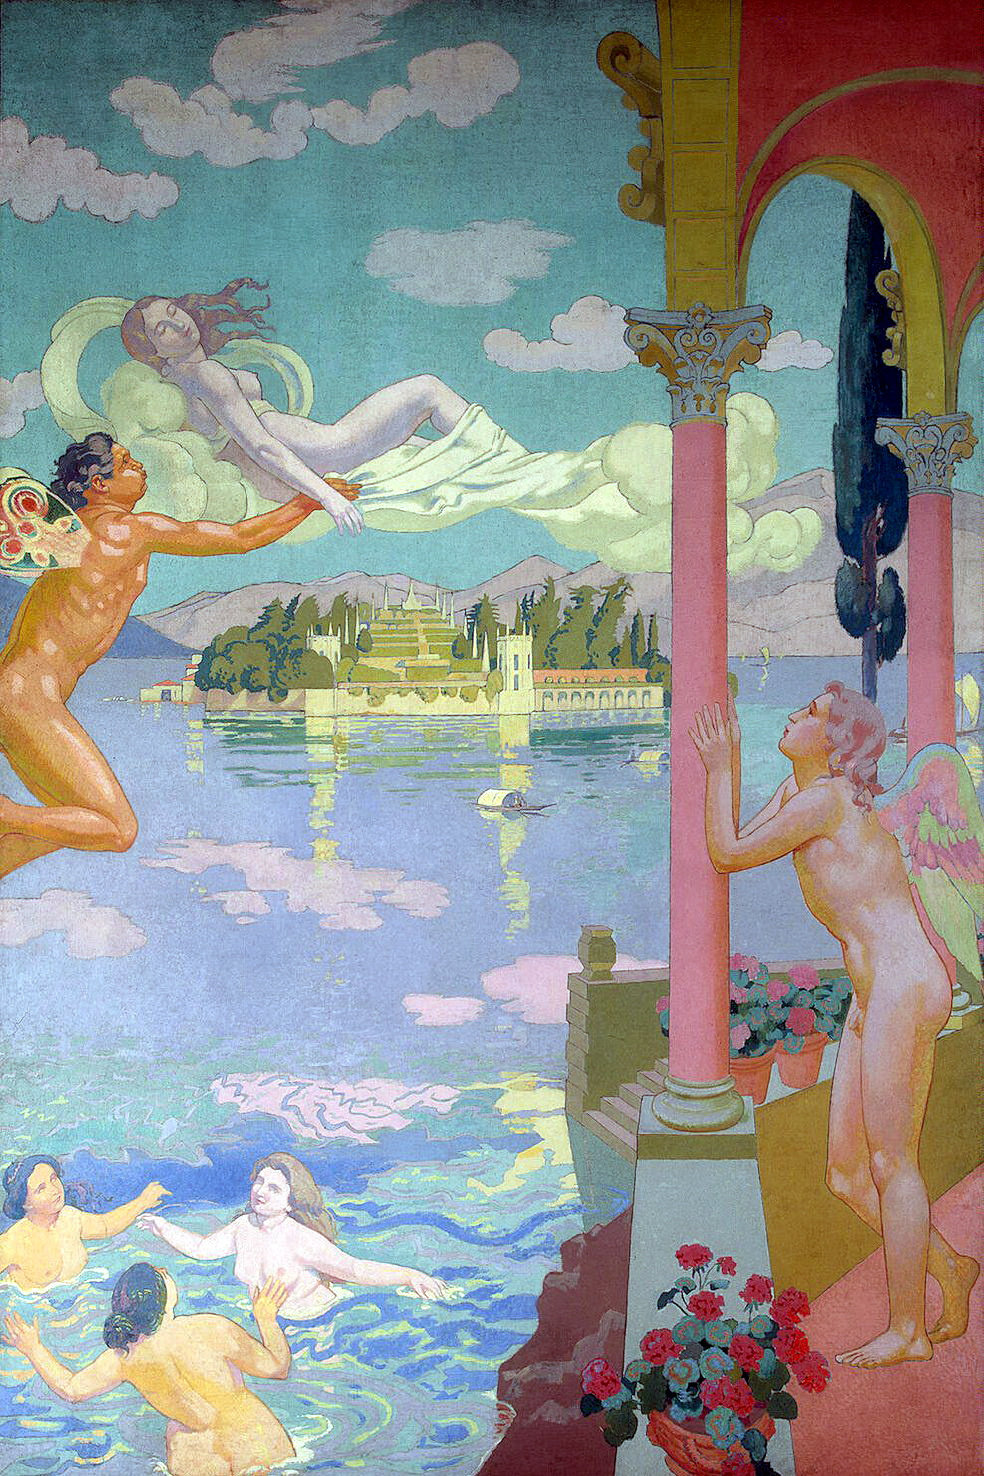 Maurice Denis. Zephyr transporting psyche to the island of Bliss